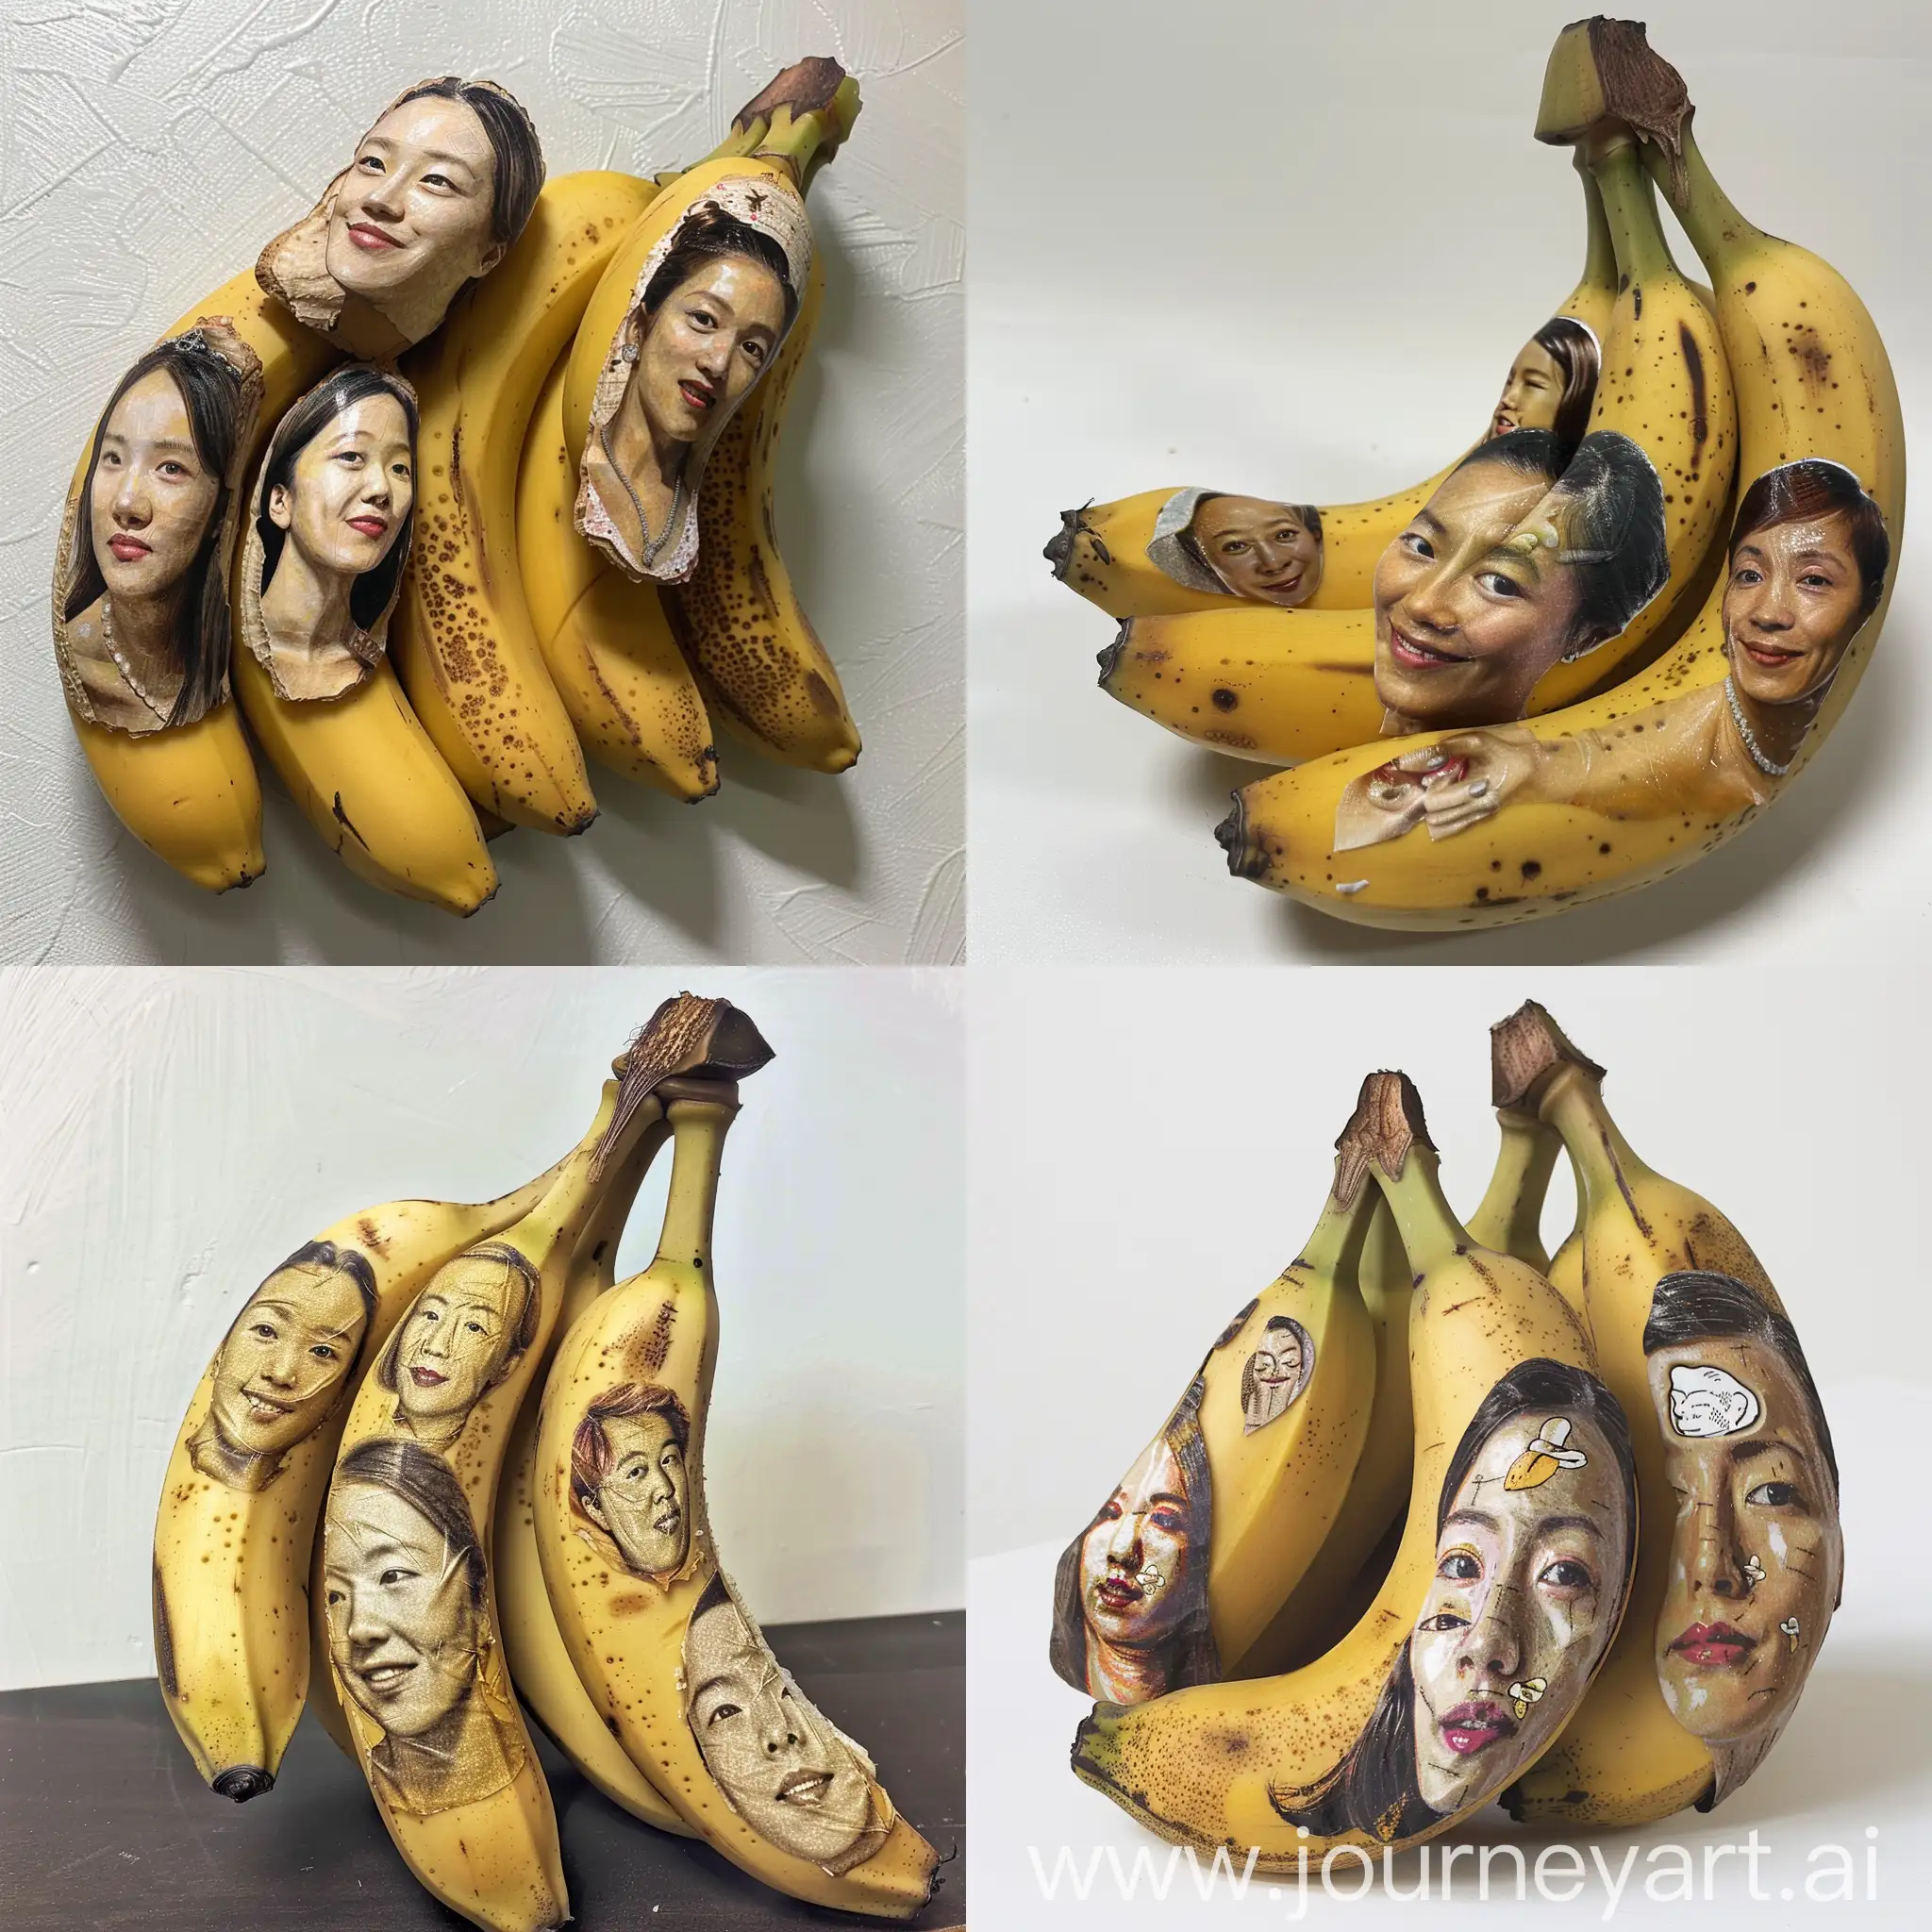 A bunch of 4 bananas. Bananas have humans faces. 2 faces of Taiwanese women. 1 face of a French woman. 1 face of a French man.